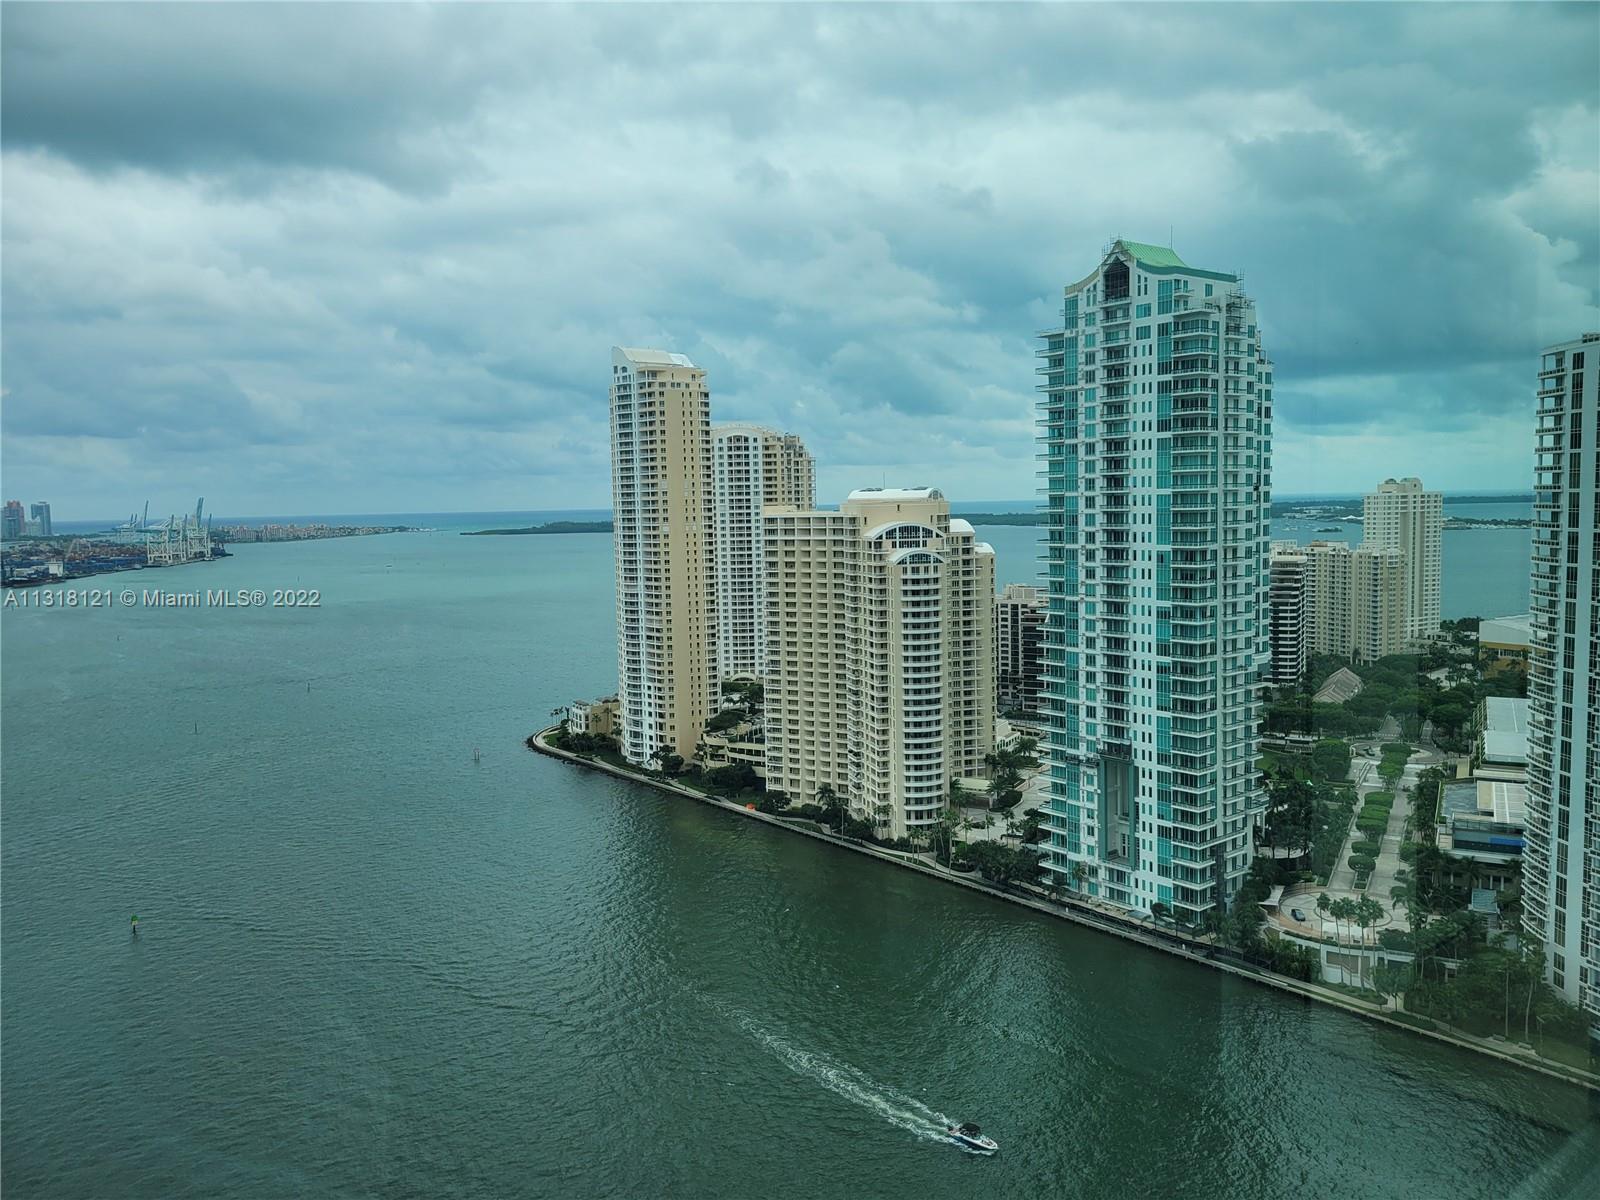 Amazing 2/2, excellent location, wonderful open views to Biscayne Bay. Floors and closets recently installed. A must see.